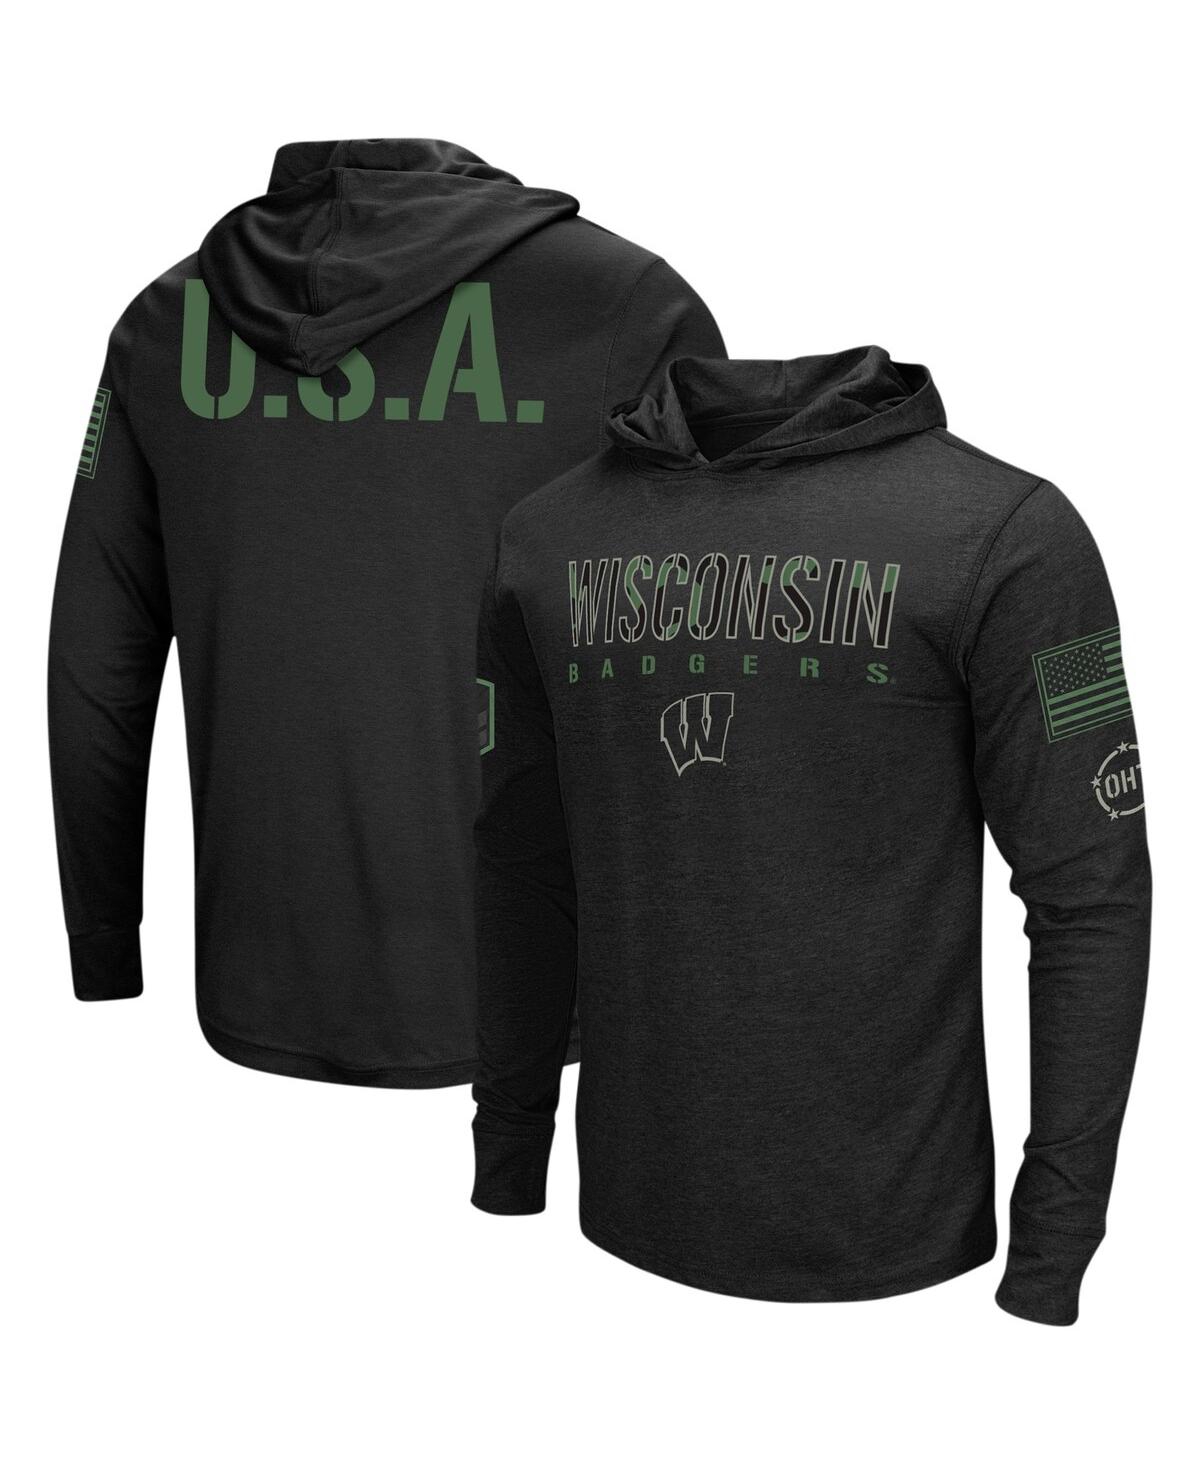 Men's Colosseum Black Wisconsin Badgers Big and Tall Oht Military-Inspired Appreciation Tango Long Sleeve Hoodie T-shirt - Black